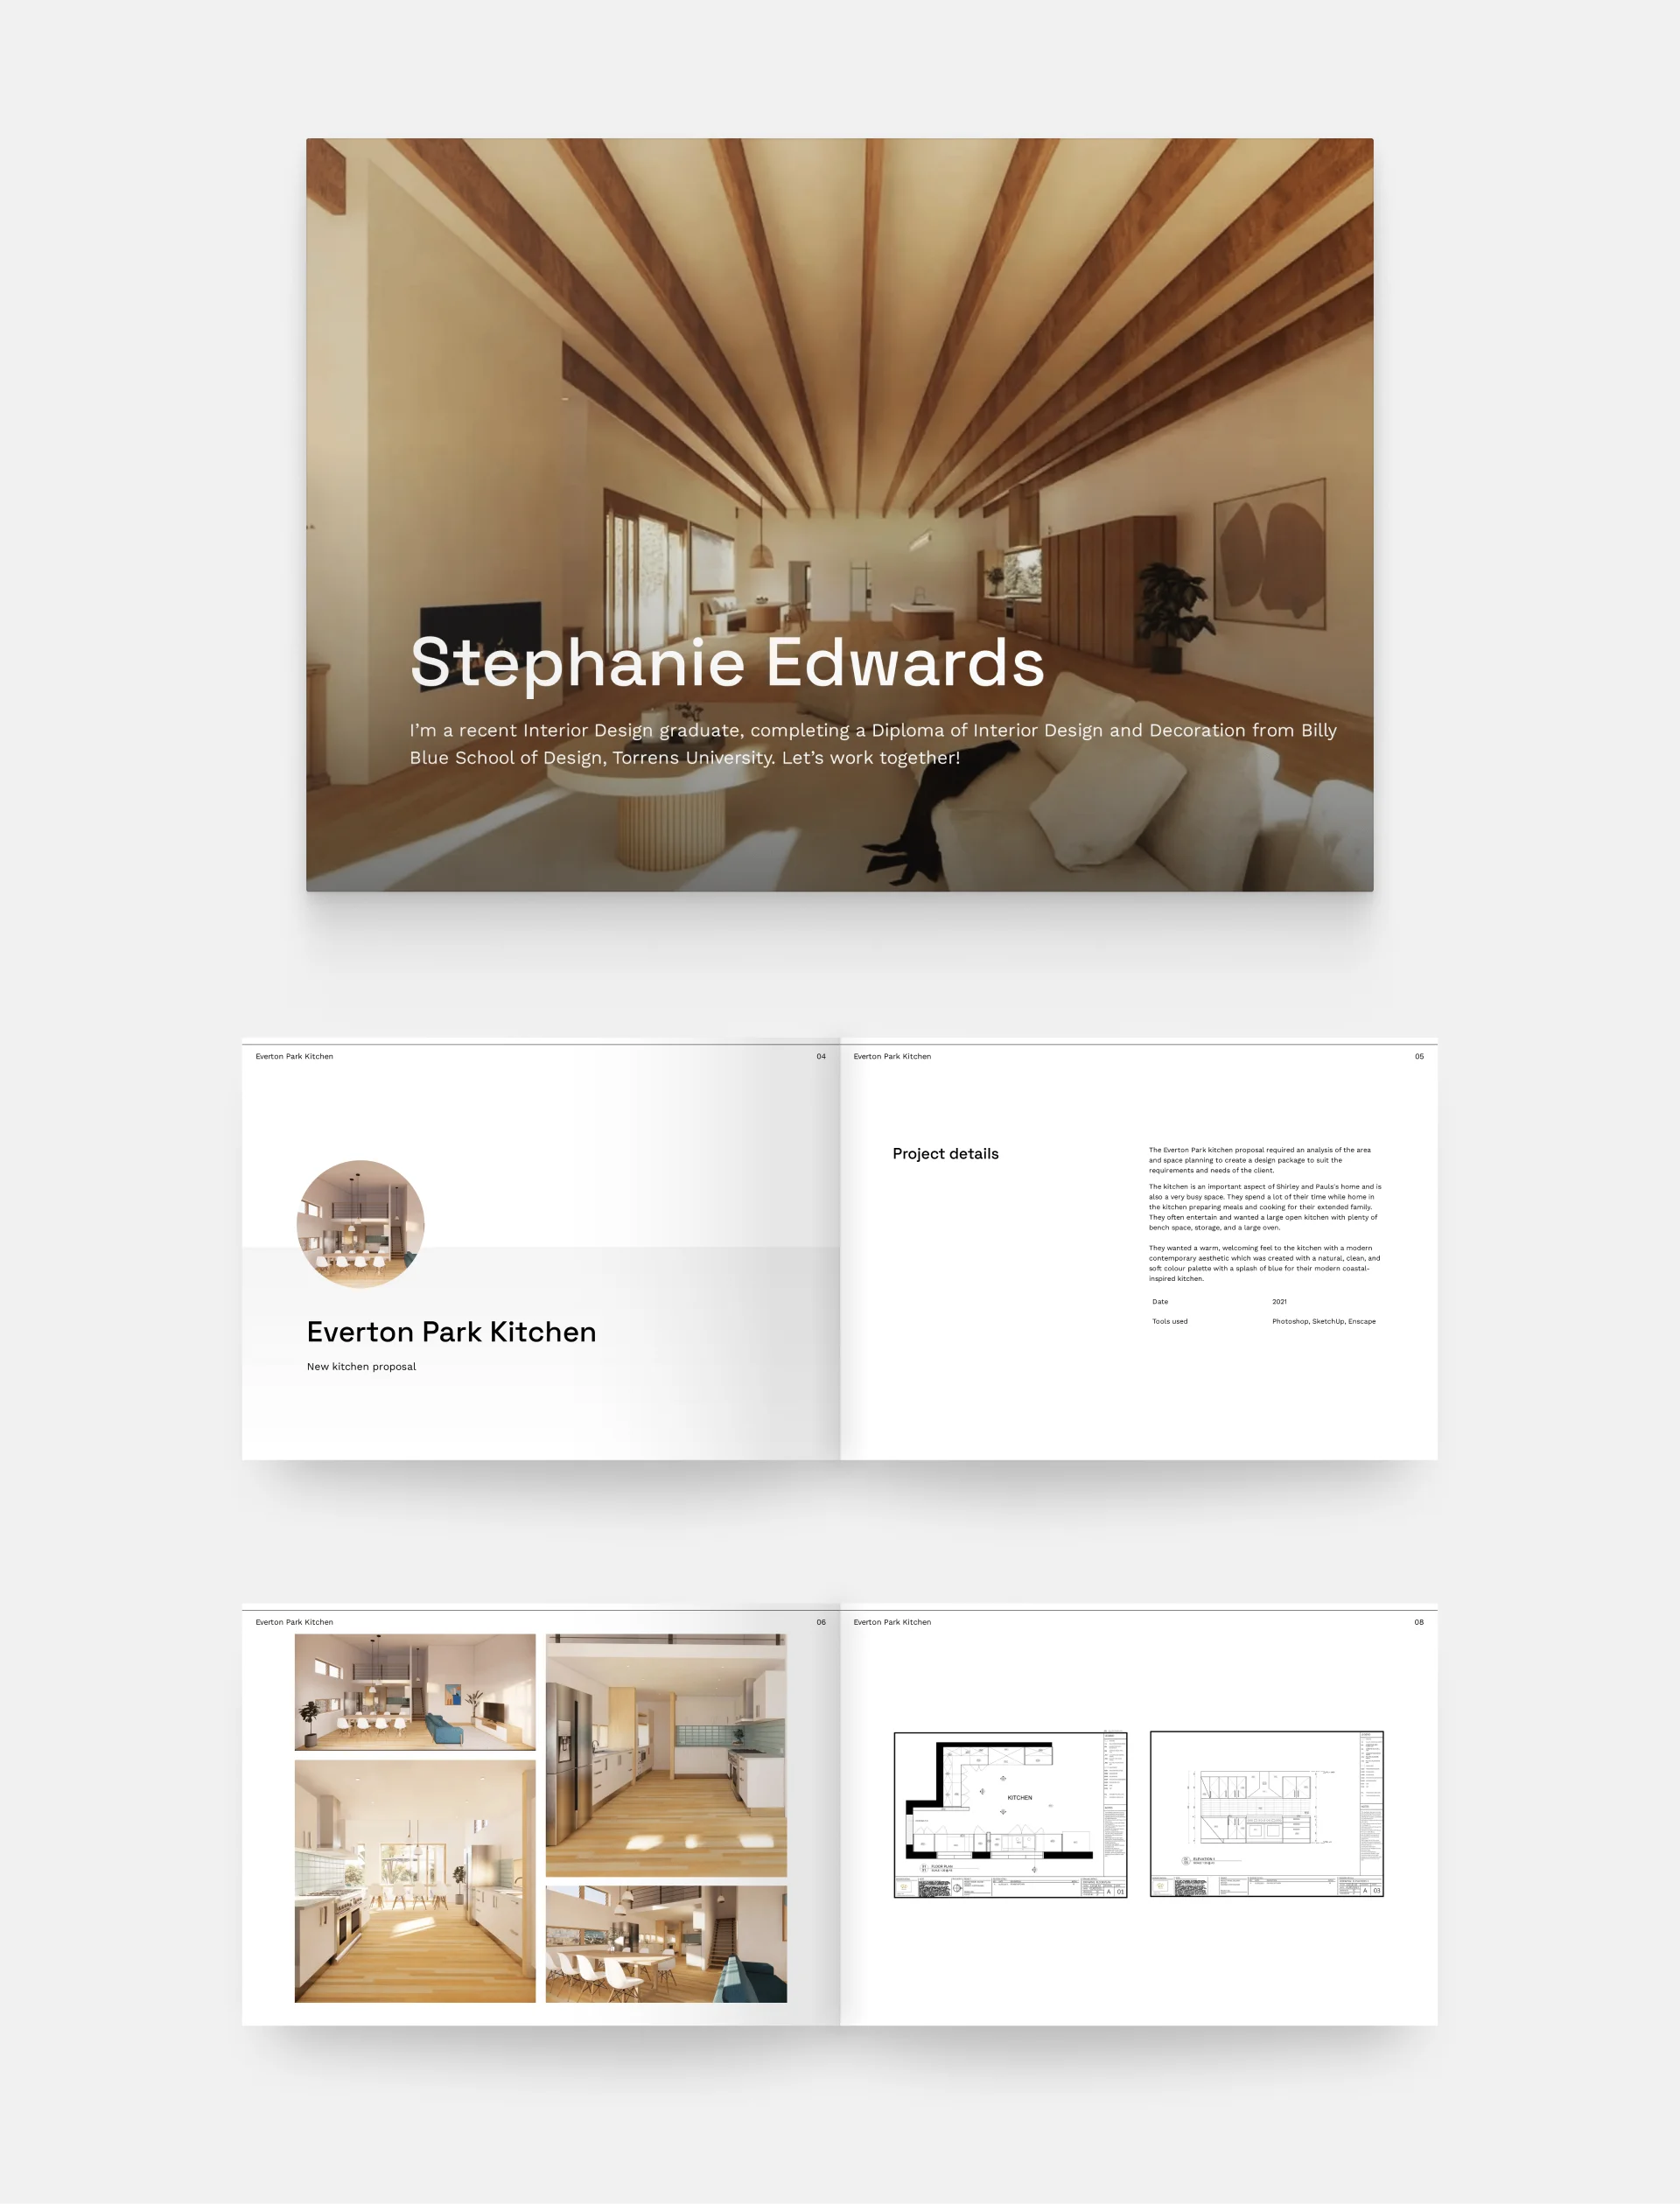 Five pages of Stephanie Edwards PDF interior design portfolio. The cover is on the top and depicts a cozy interior with visible beams.